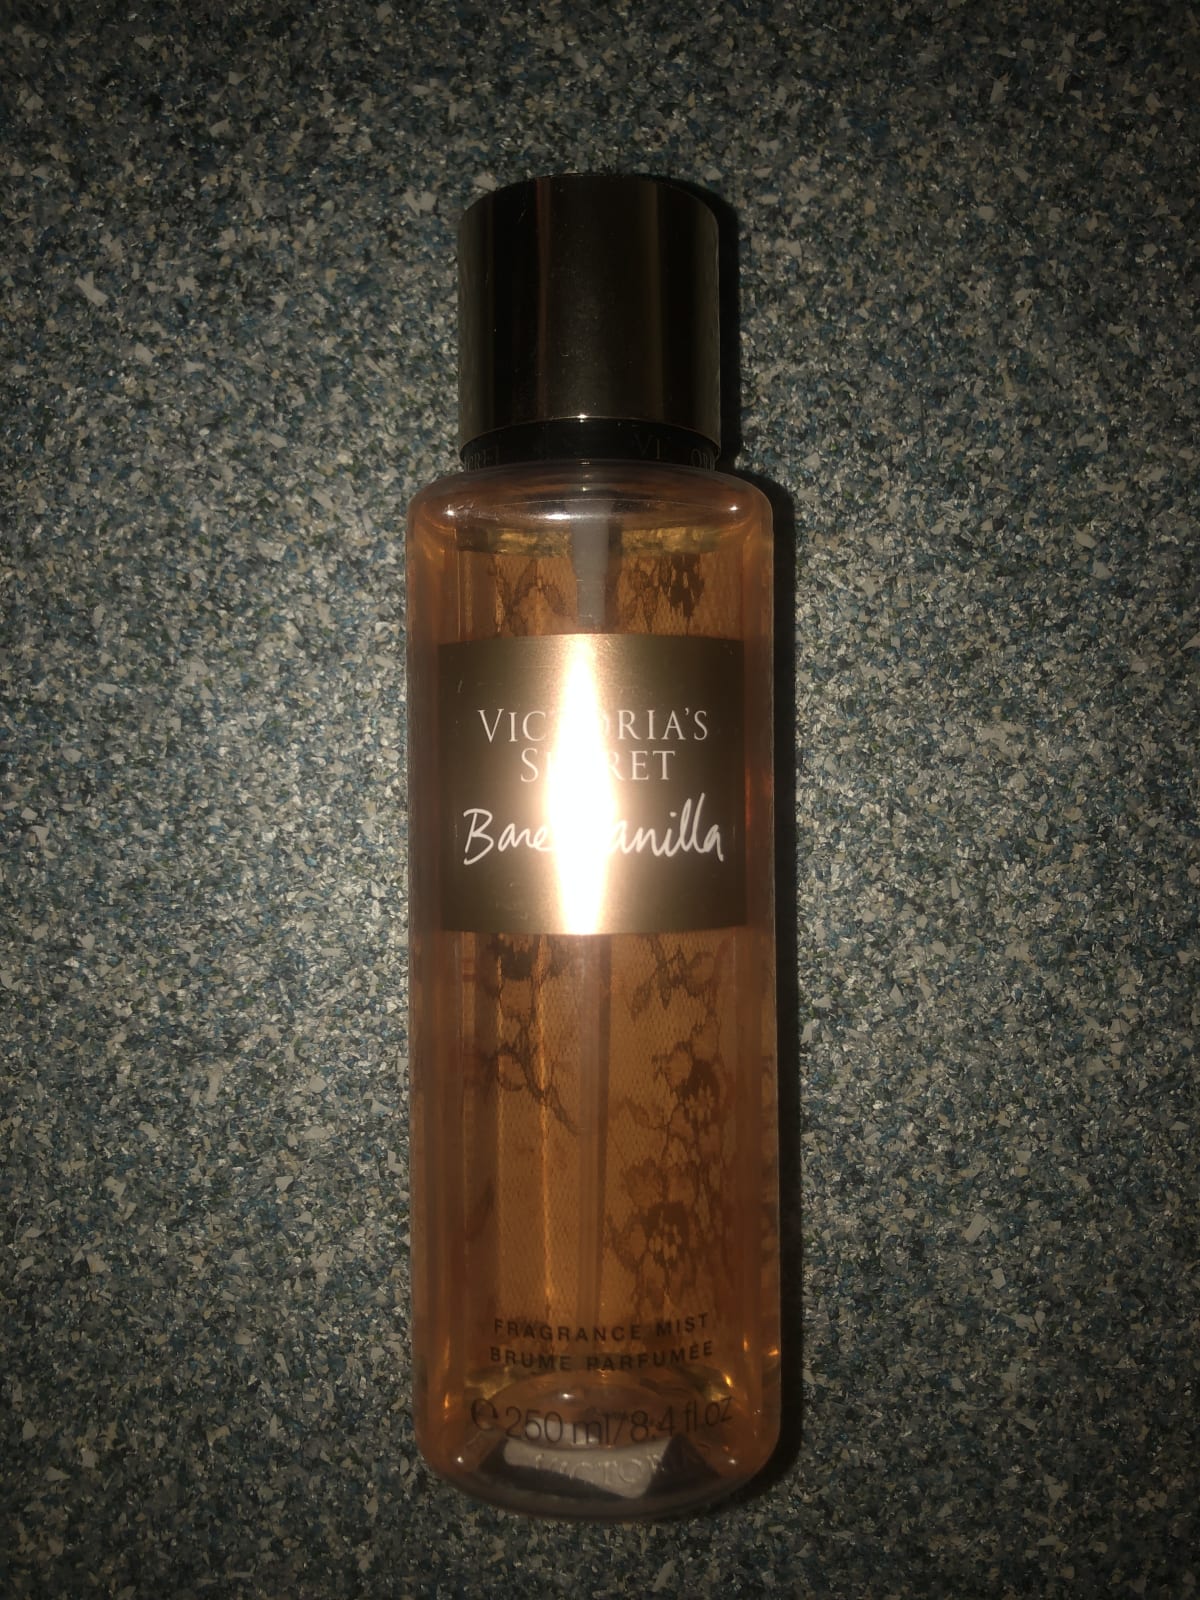 Vanilla Lace Body Mist - review image